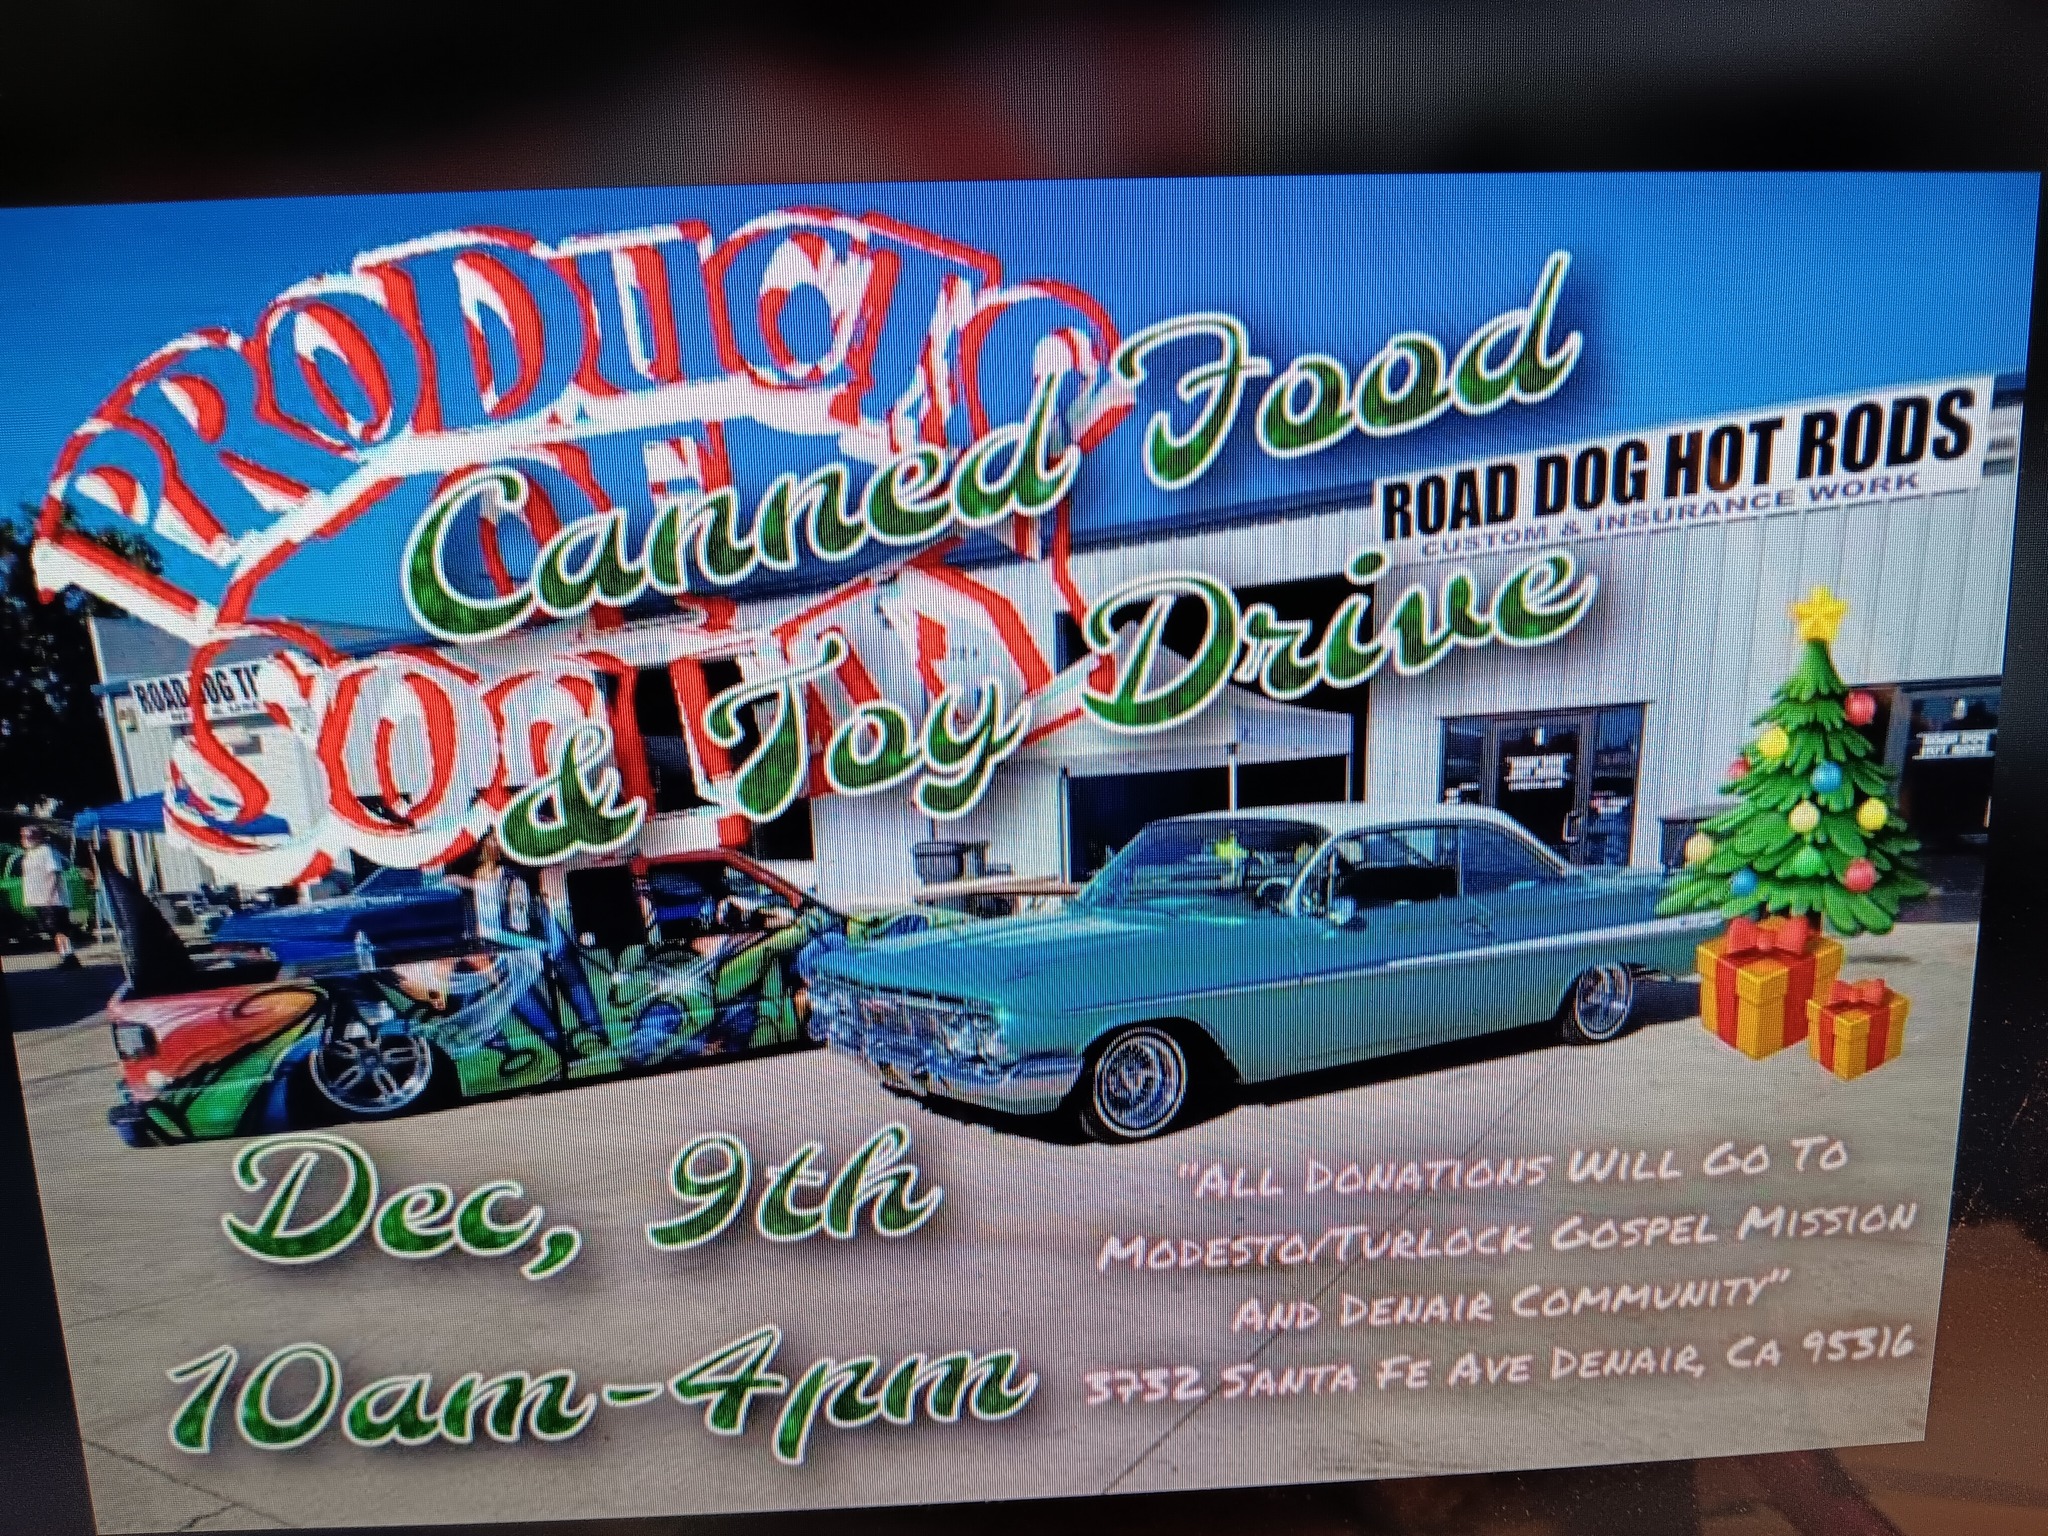 Road Dog Canned Food & Toy Drive